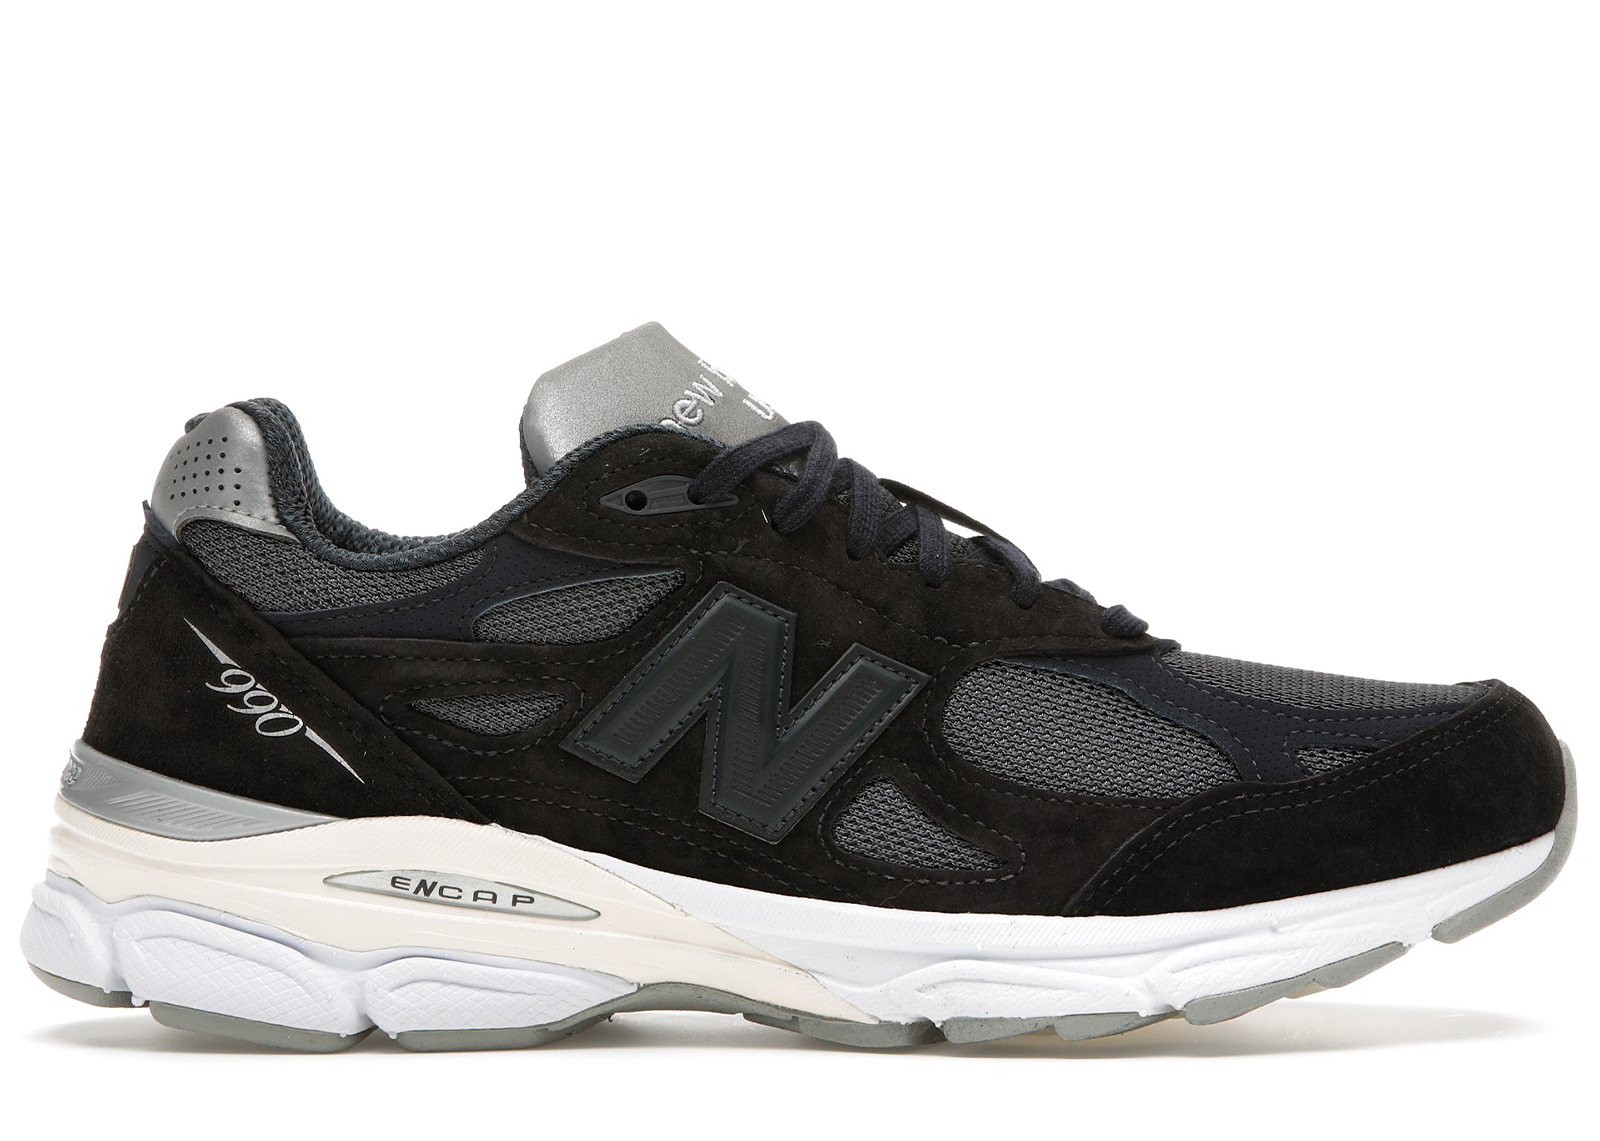 Buy New Balance 990v3 Shoes & New Sneakers - StockX